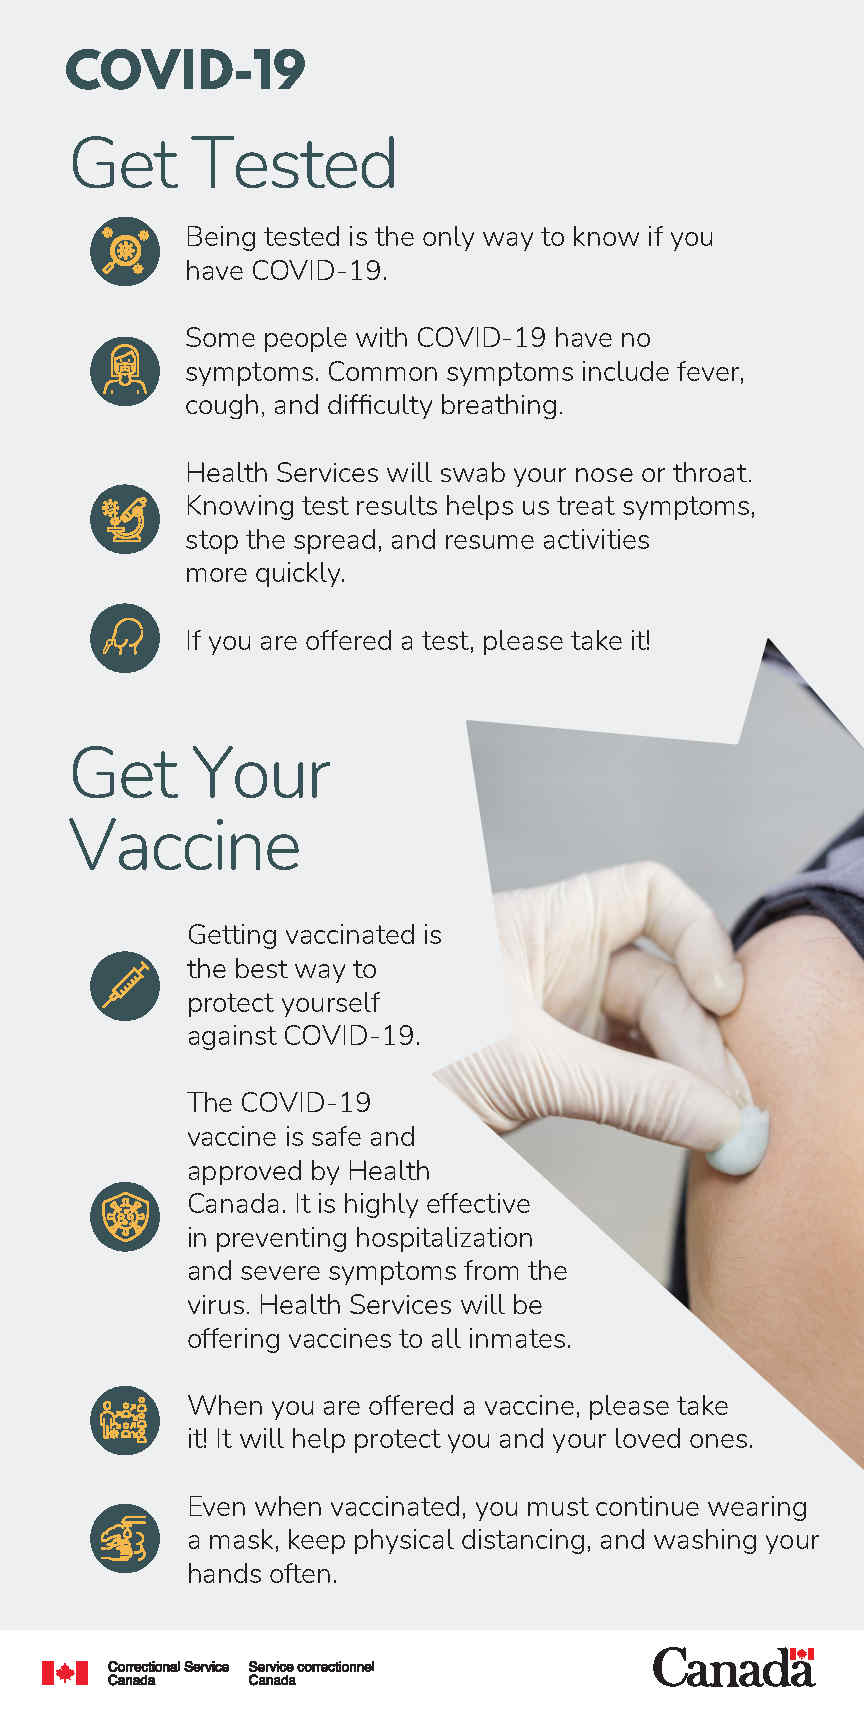 COVID-19: Get tested, get your vaccine - Canada.ca